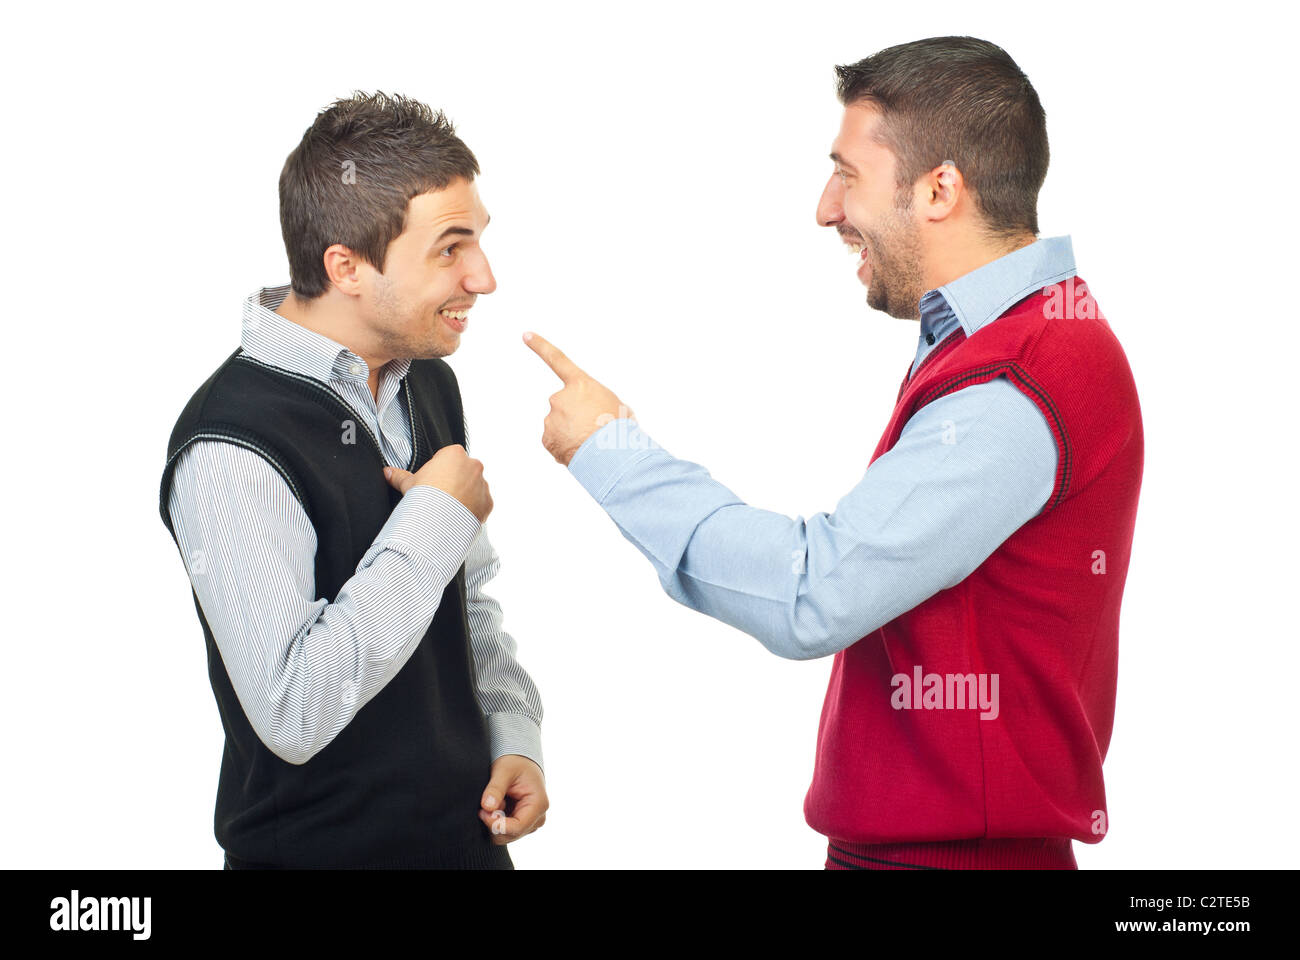 Two men laughing and have fun while one of them accusing the other and pointing to him isolated on white background Stock Photo